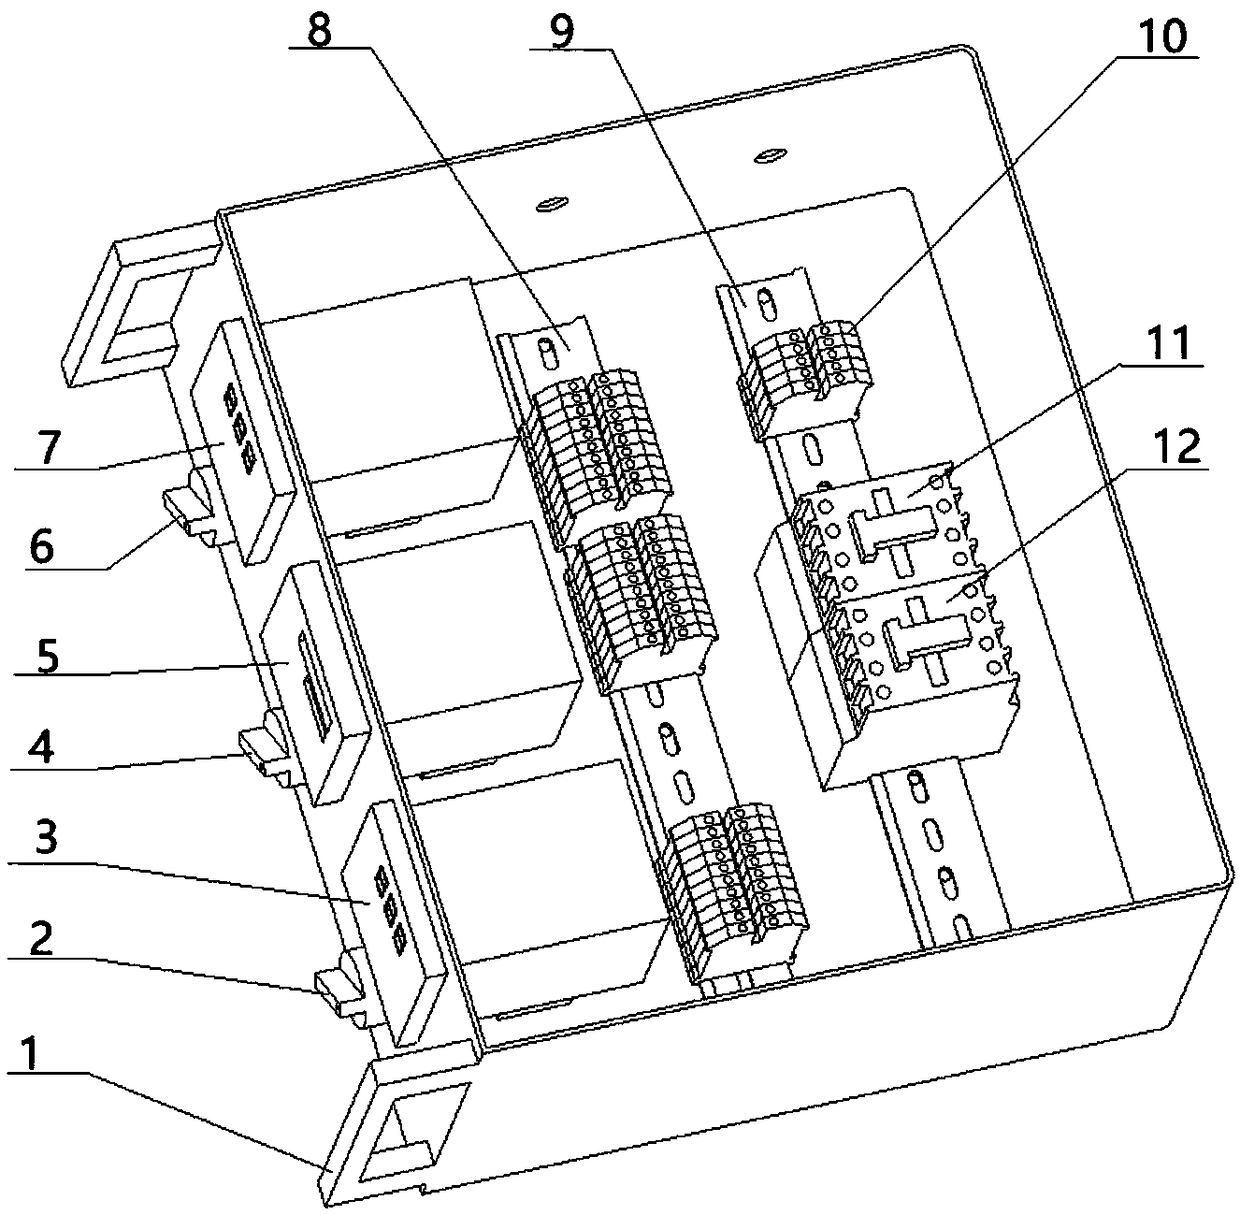 A heating box control system and control cabinet for observing thermal deformation of piezoelectric devices